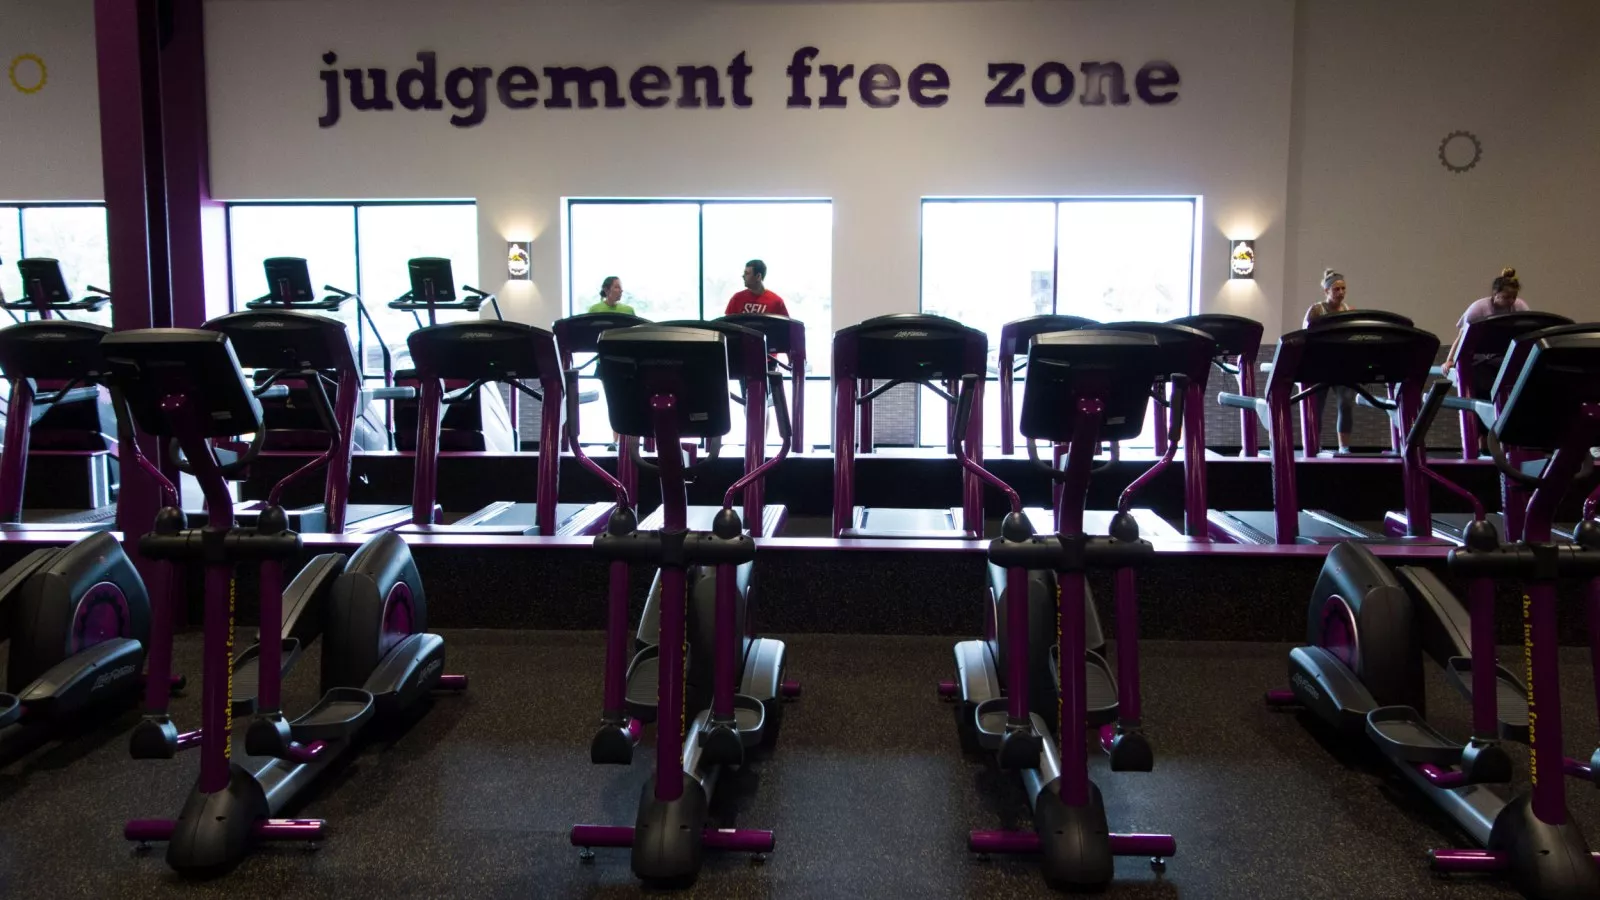 Planet Fitness Faces Boycott Calls from Outraged Conservatives